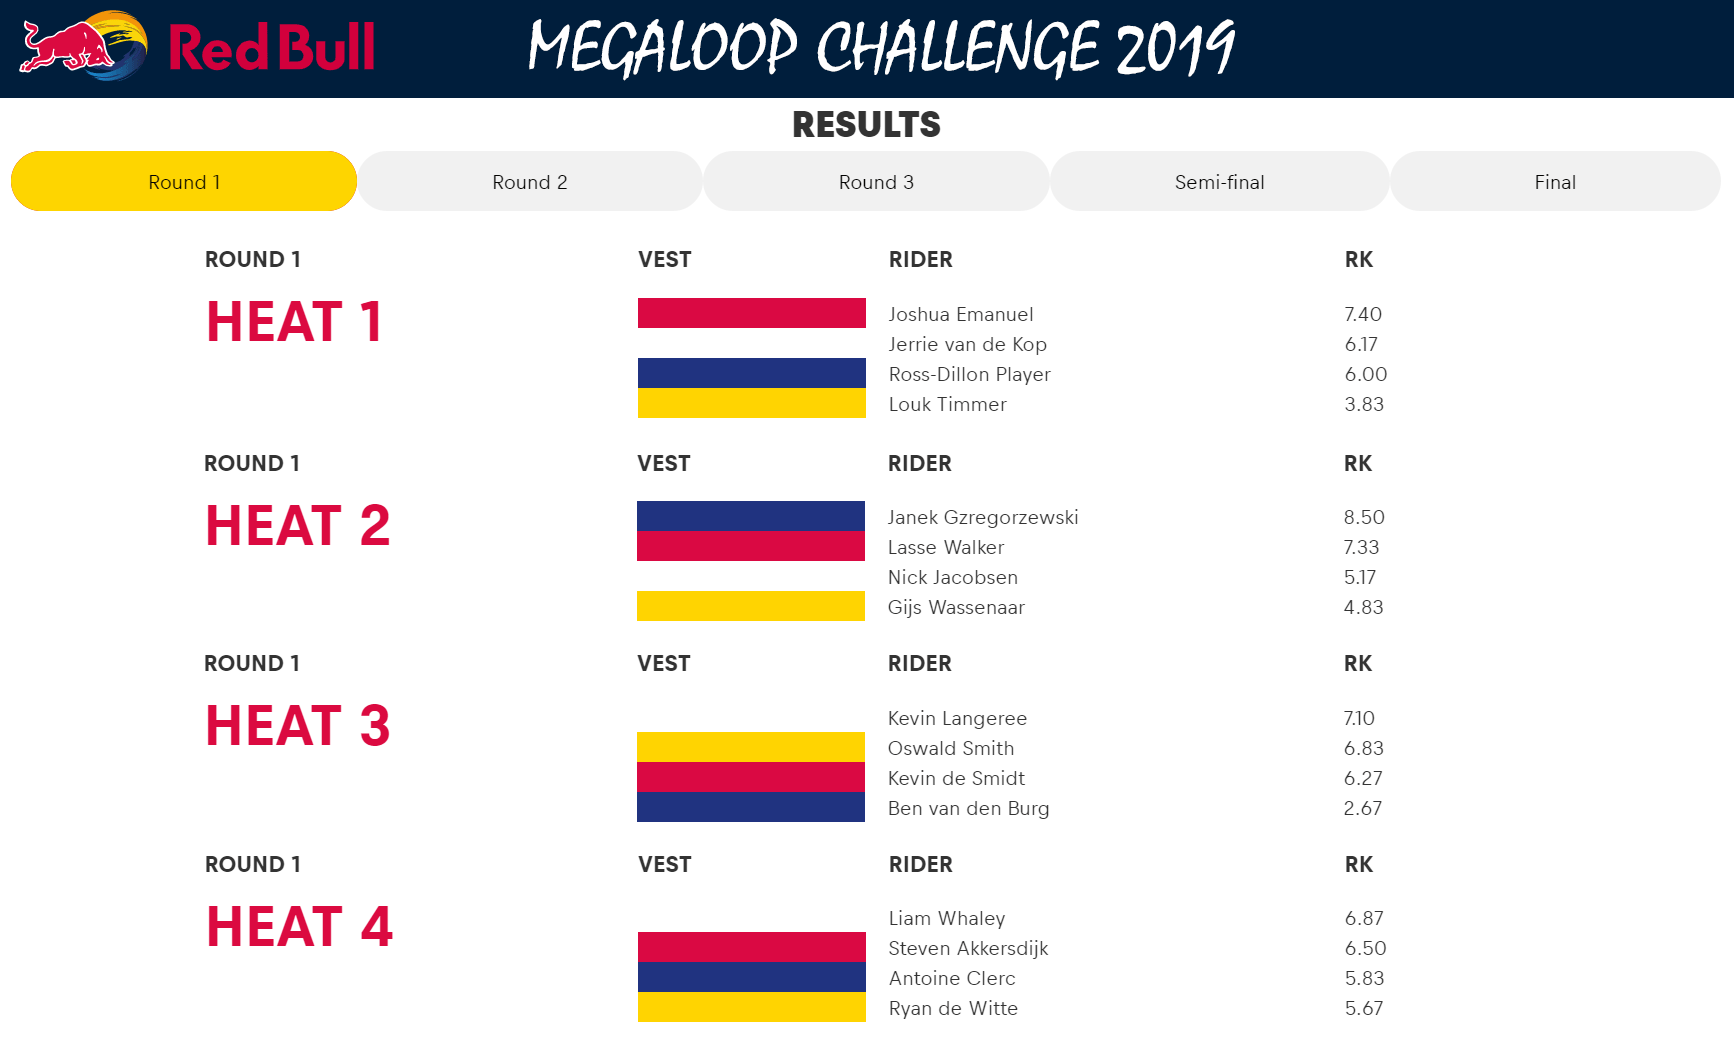 2019 06 08 RedBull Megaloop Challenge results - round 1